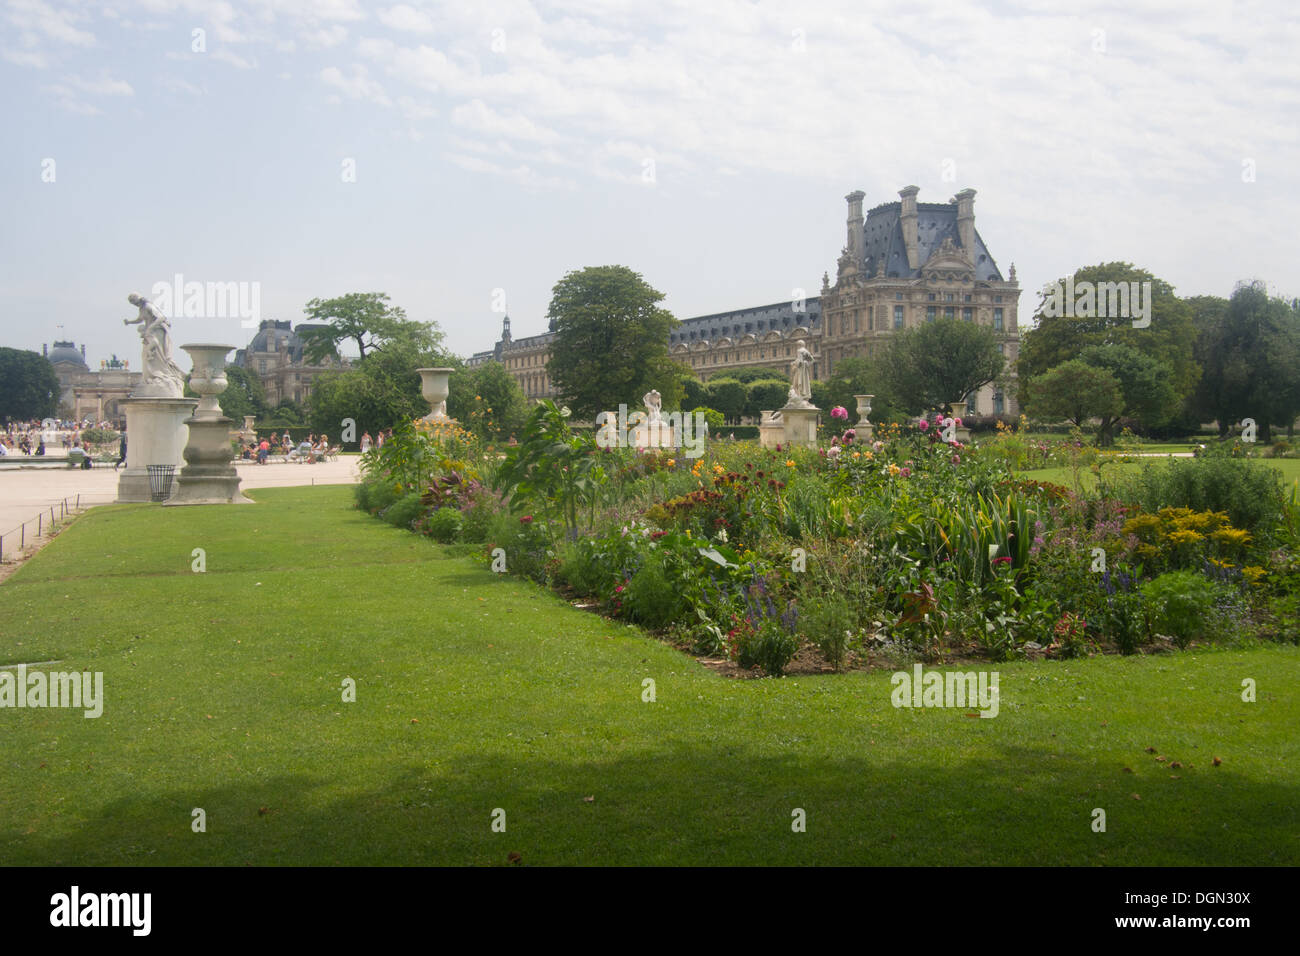 Tuileries Garden and The Louvre, Paris, France Stock Photo